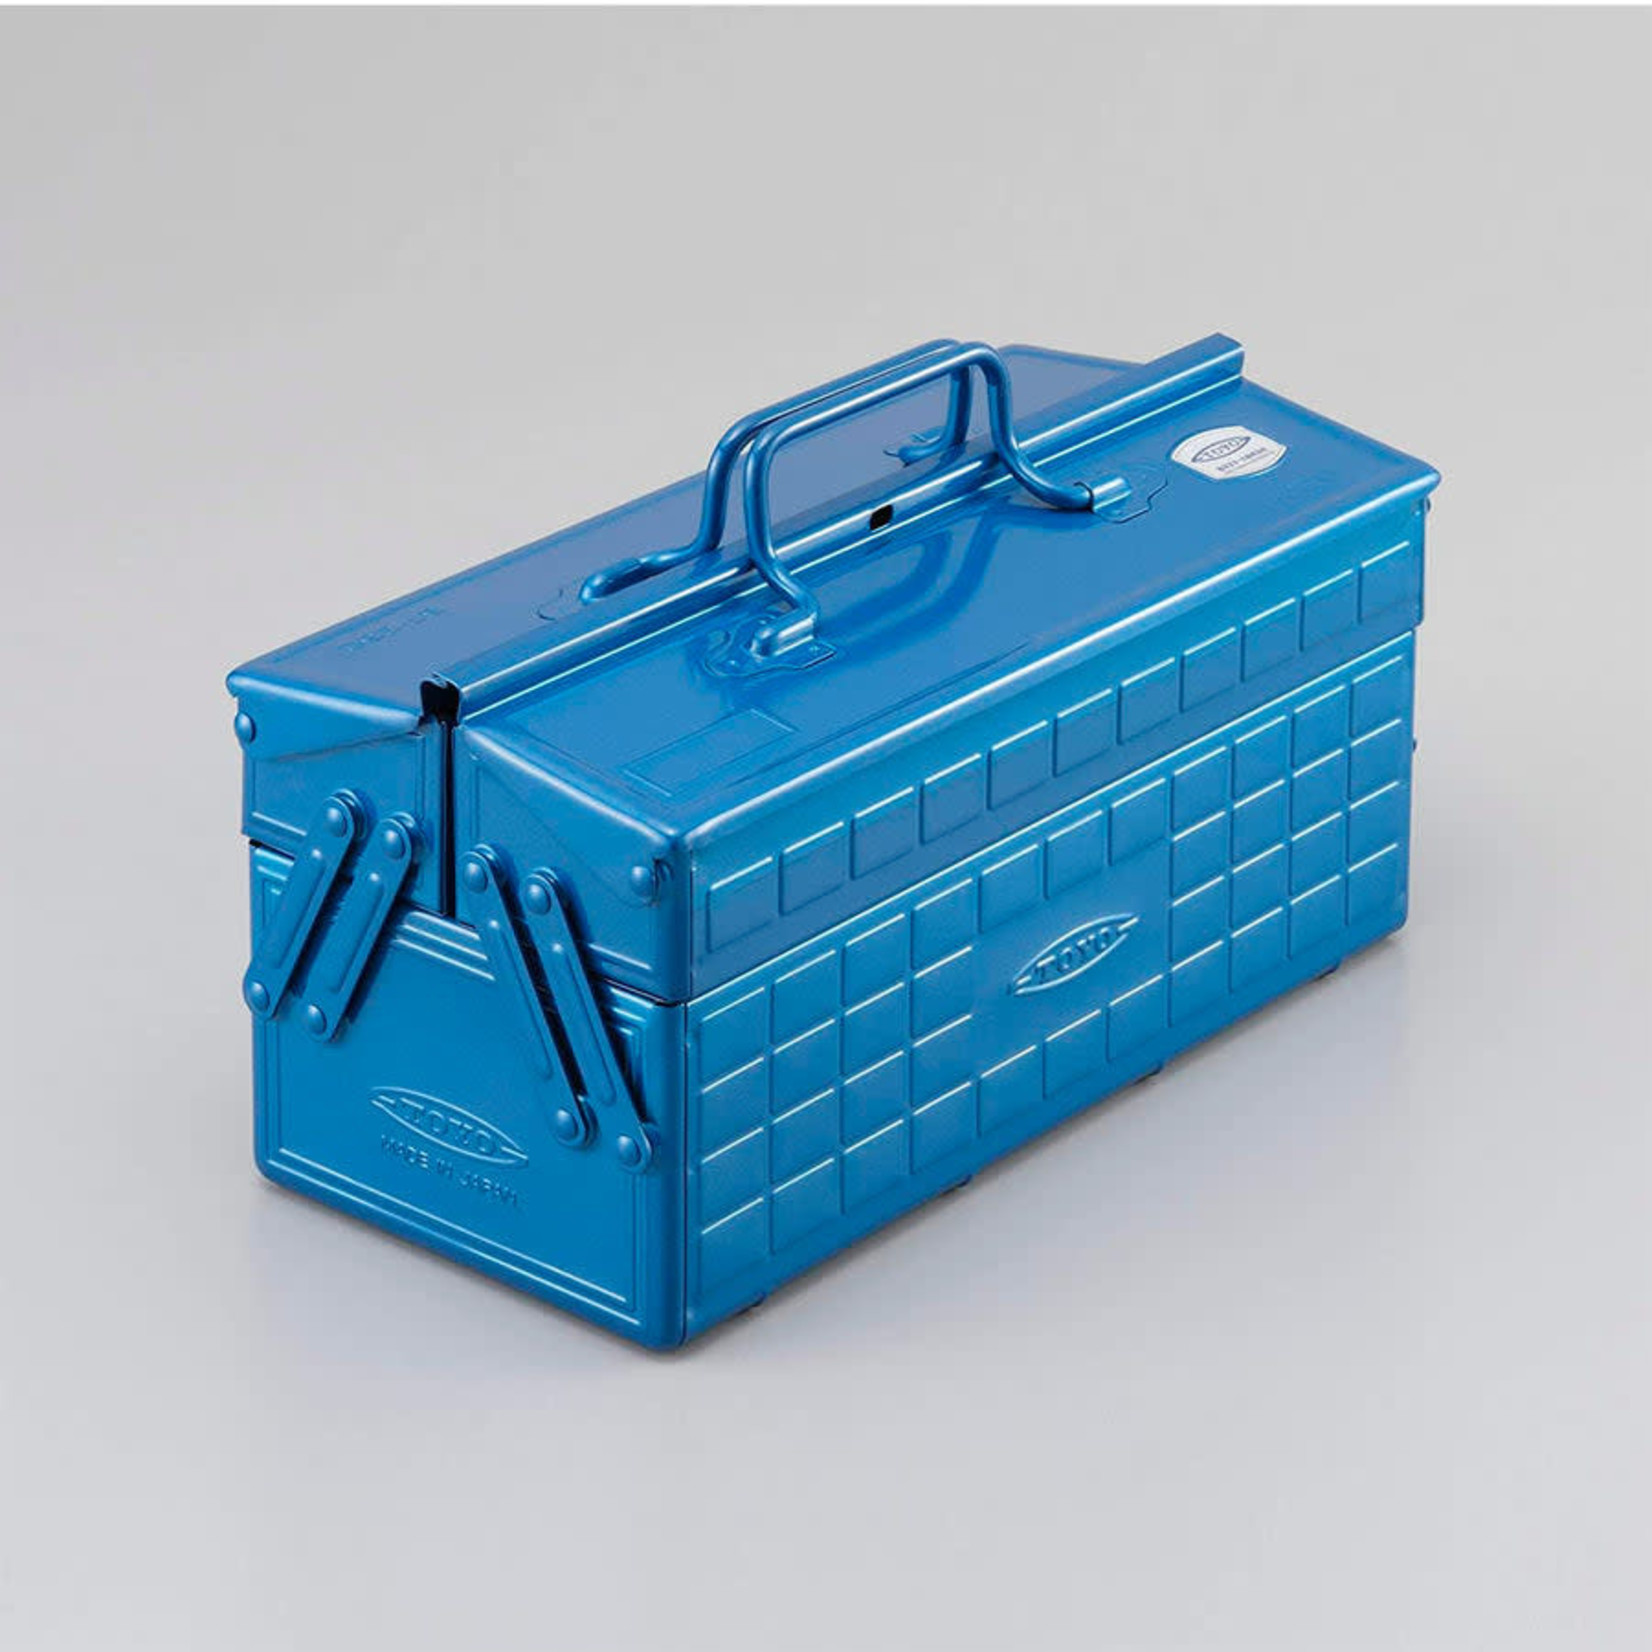 Toyo Toyo Steel Cantilever Toolbox ST-350 Blue